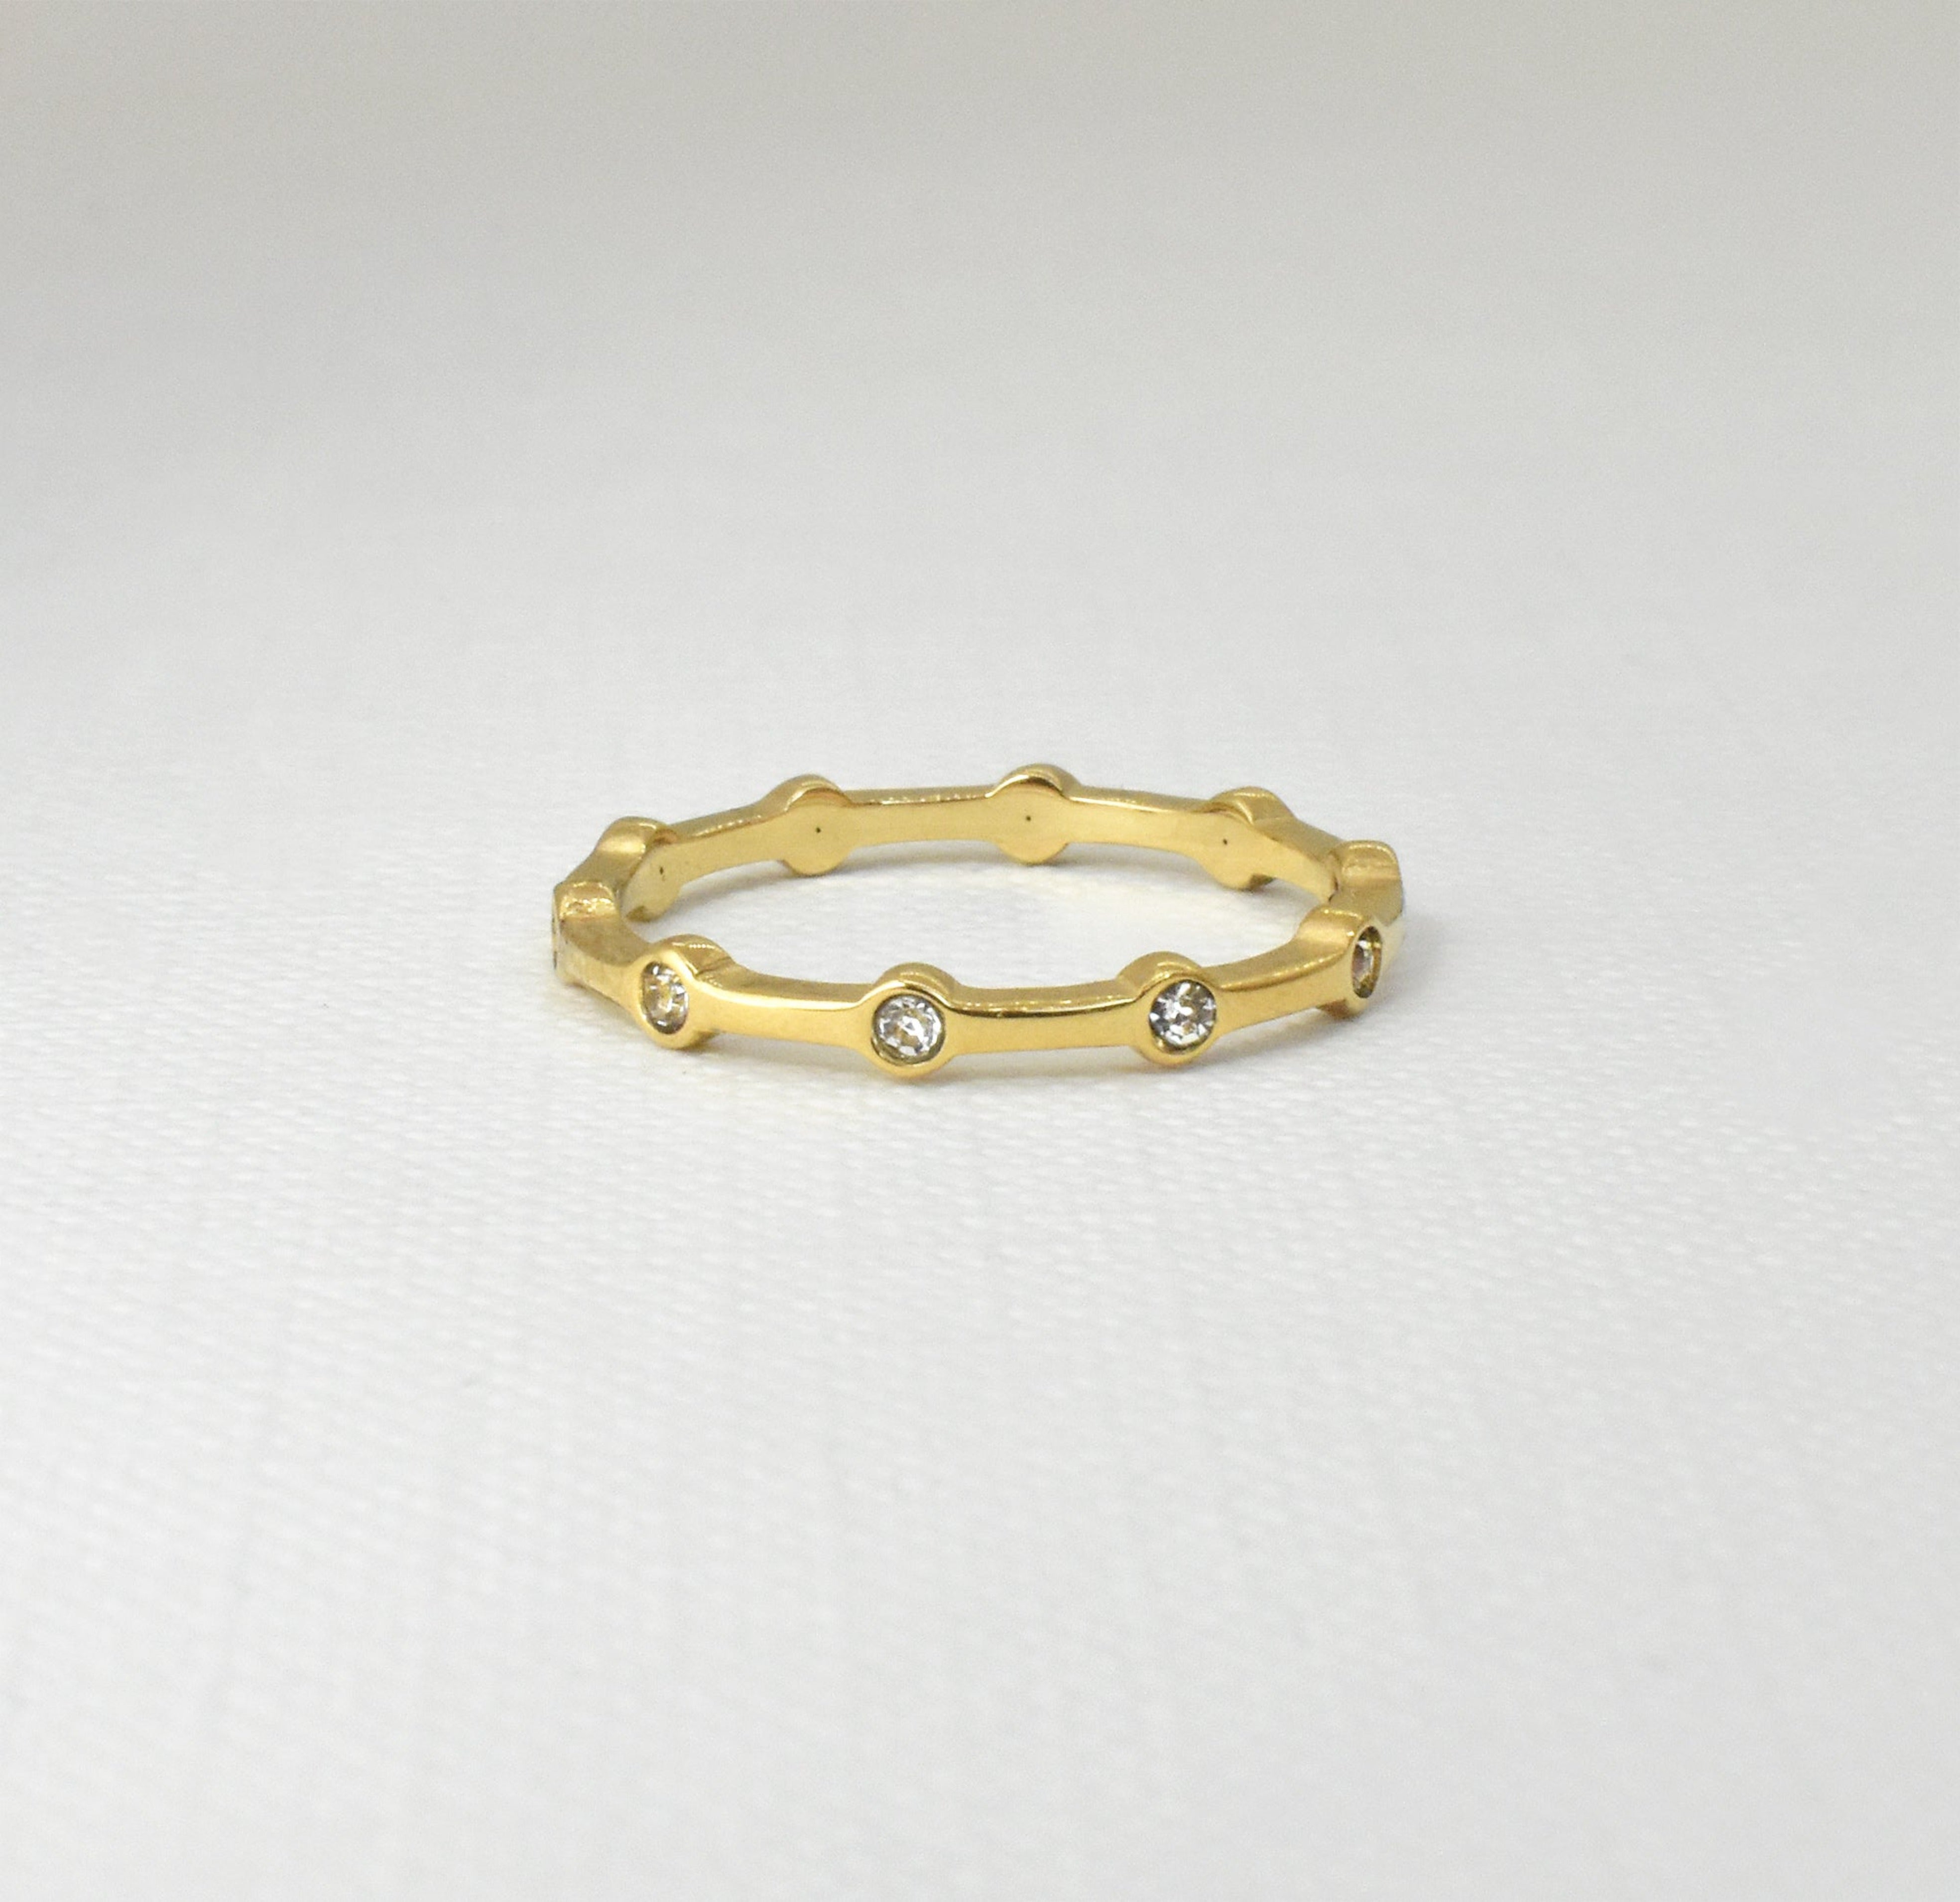 Daphne thin dainty gold pave ring, waterproof jewelry